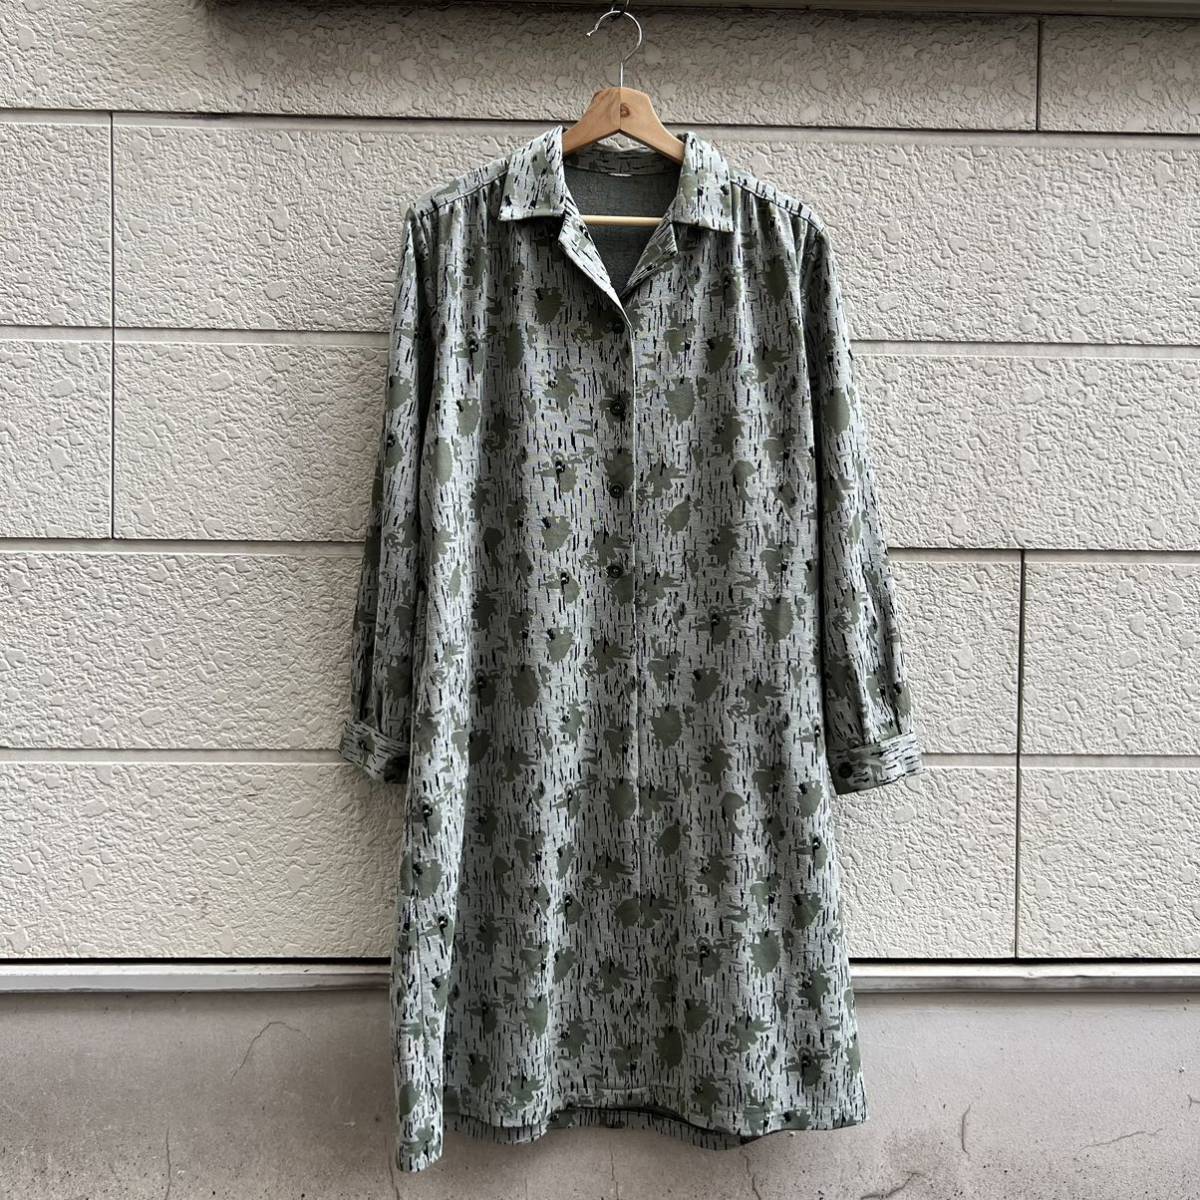 USED USA古着 シャツワンピース カモフラ柄 迷彩柄 カモフラージュ ロング丈 ロングシャツ アメリカ古着 vintage ヴィンテージ 総柄_画像1